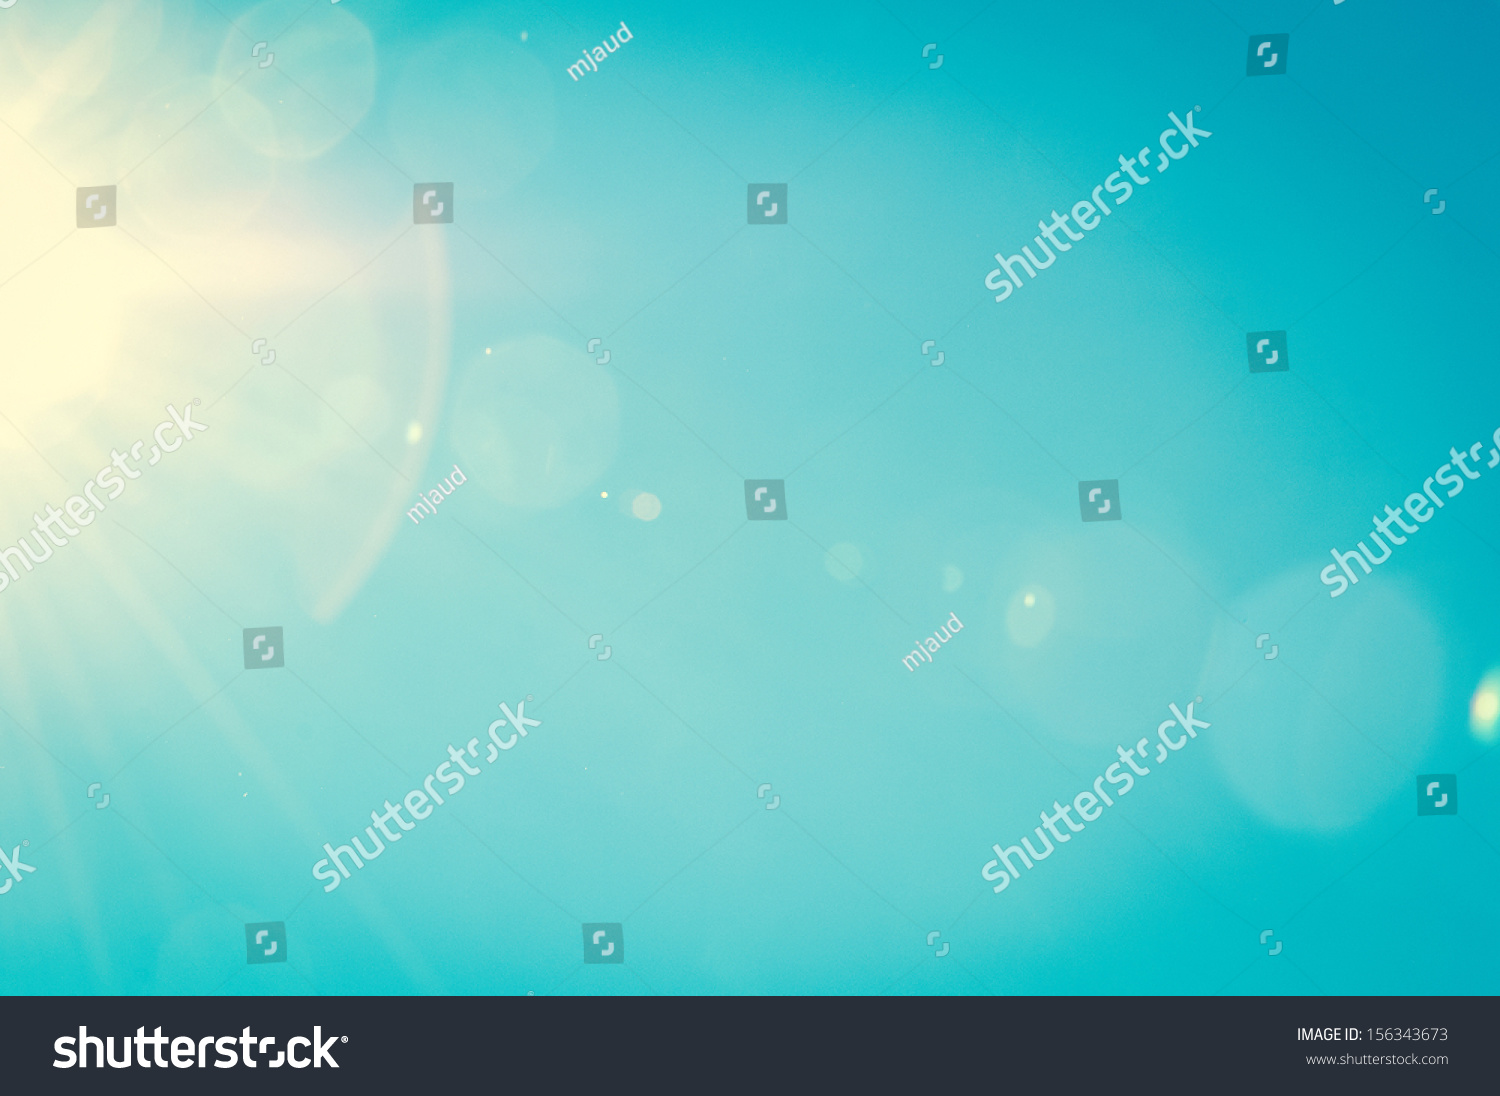 Sunshine and blue sky with flares in summer #156343673